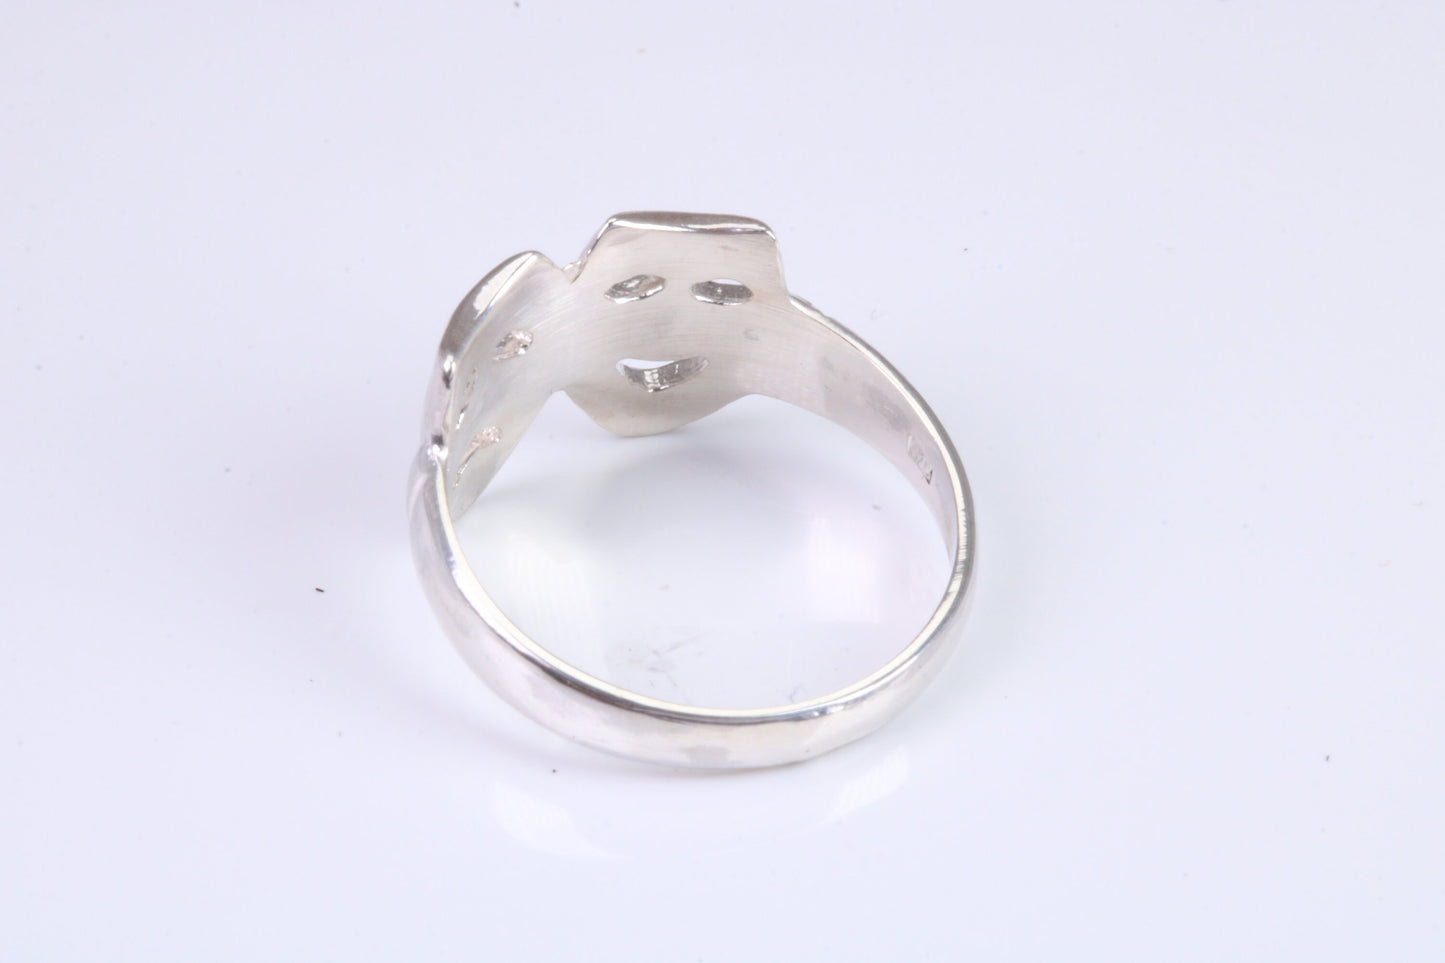 Happy and Sad mask ring, solid silver, suitable for ladies or gents. Available in silver, yellow gold, white gold and platinum